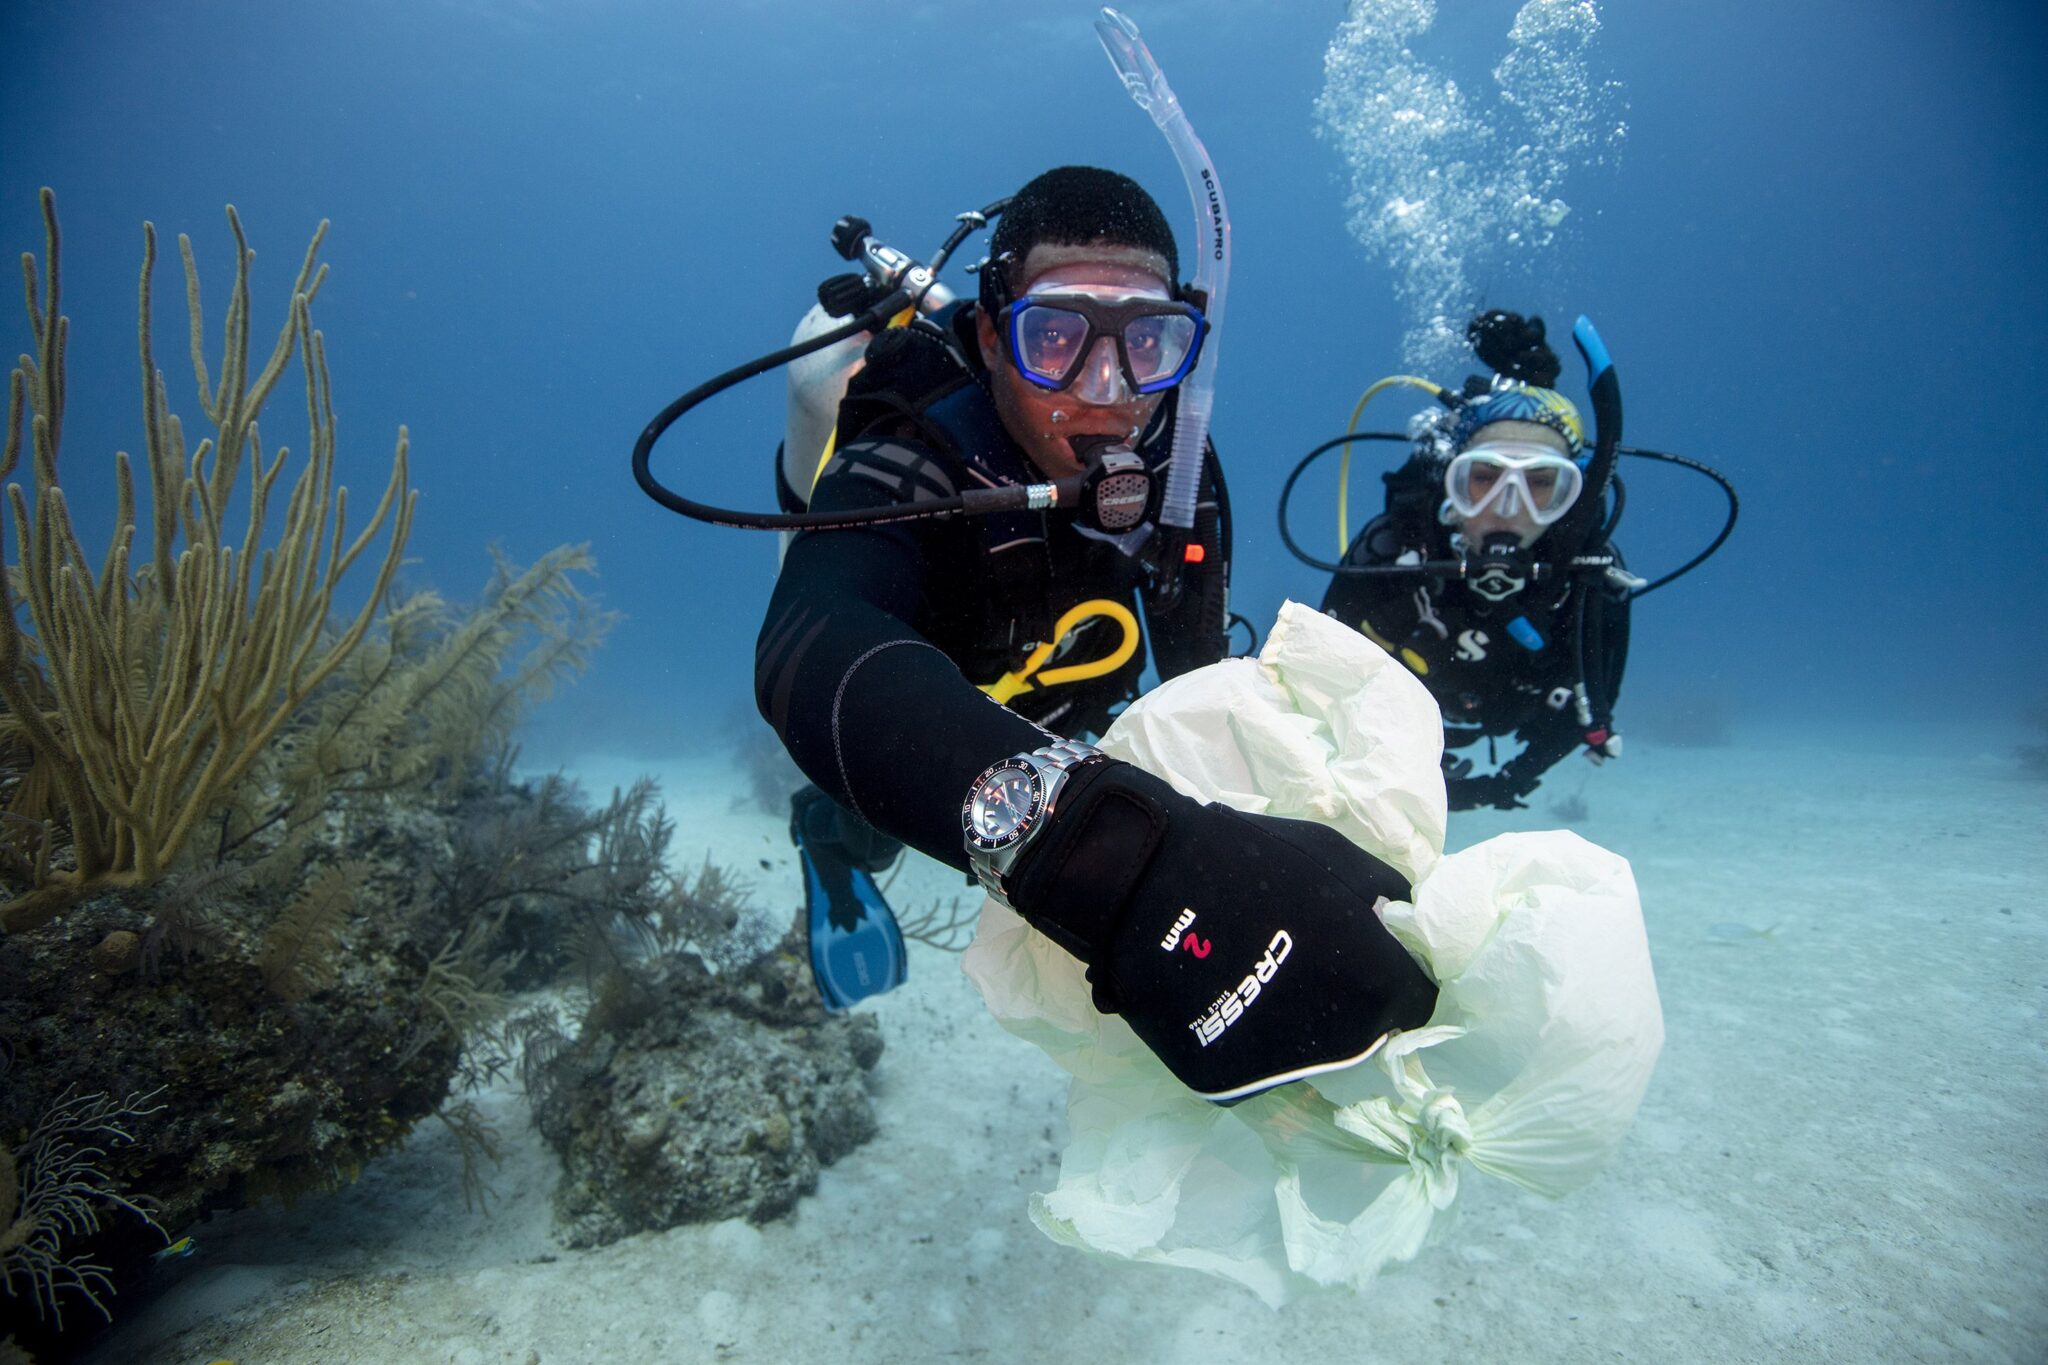 Two conservationists collecting trash underwater to help the ocean, which can be done to fundraise or break a world record